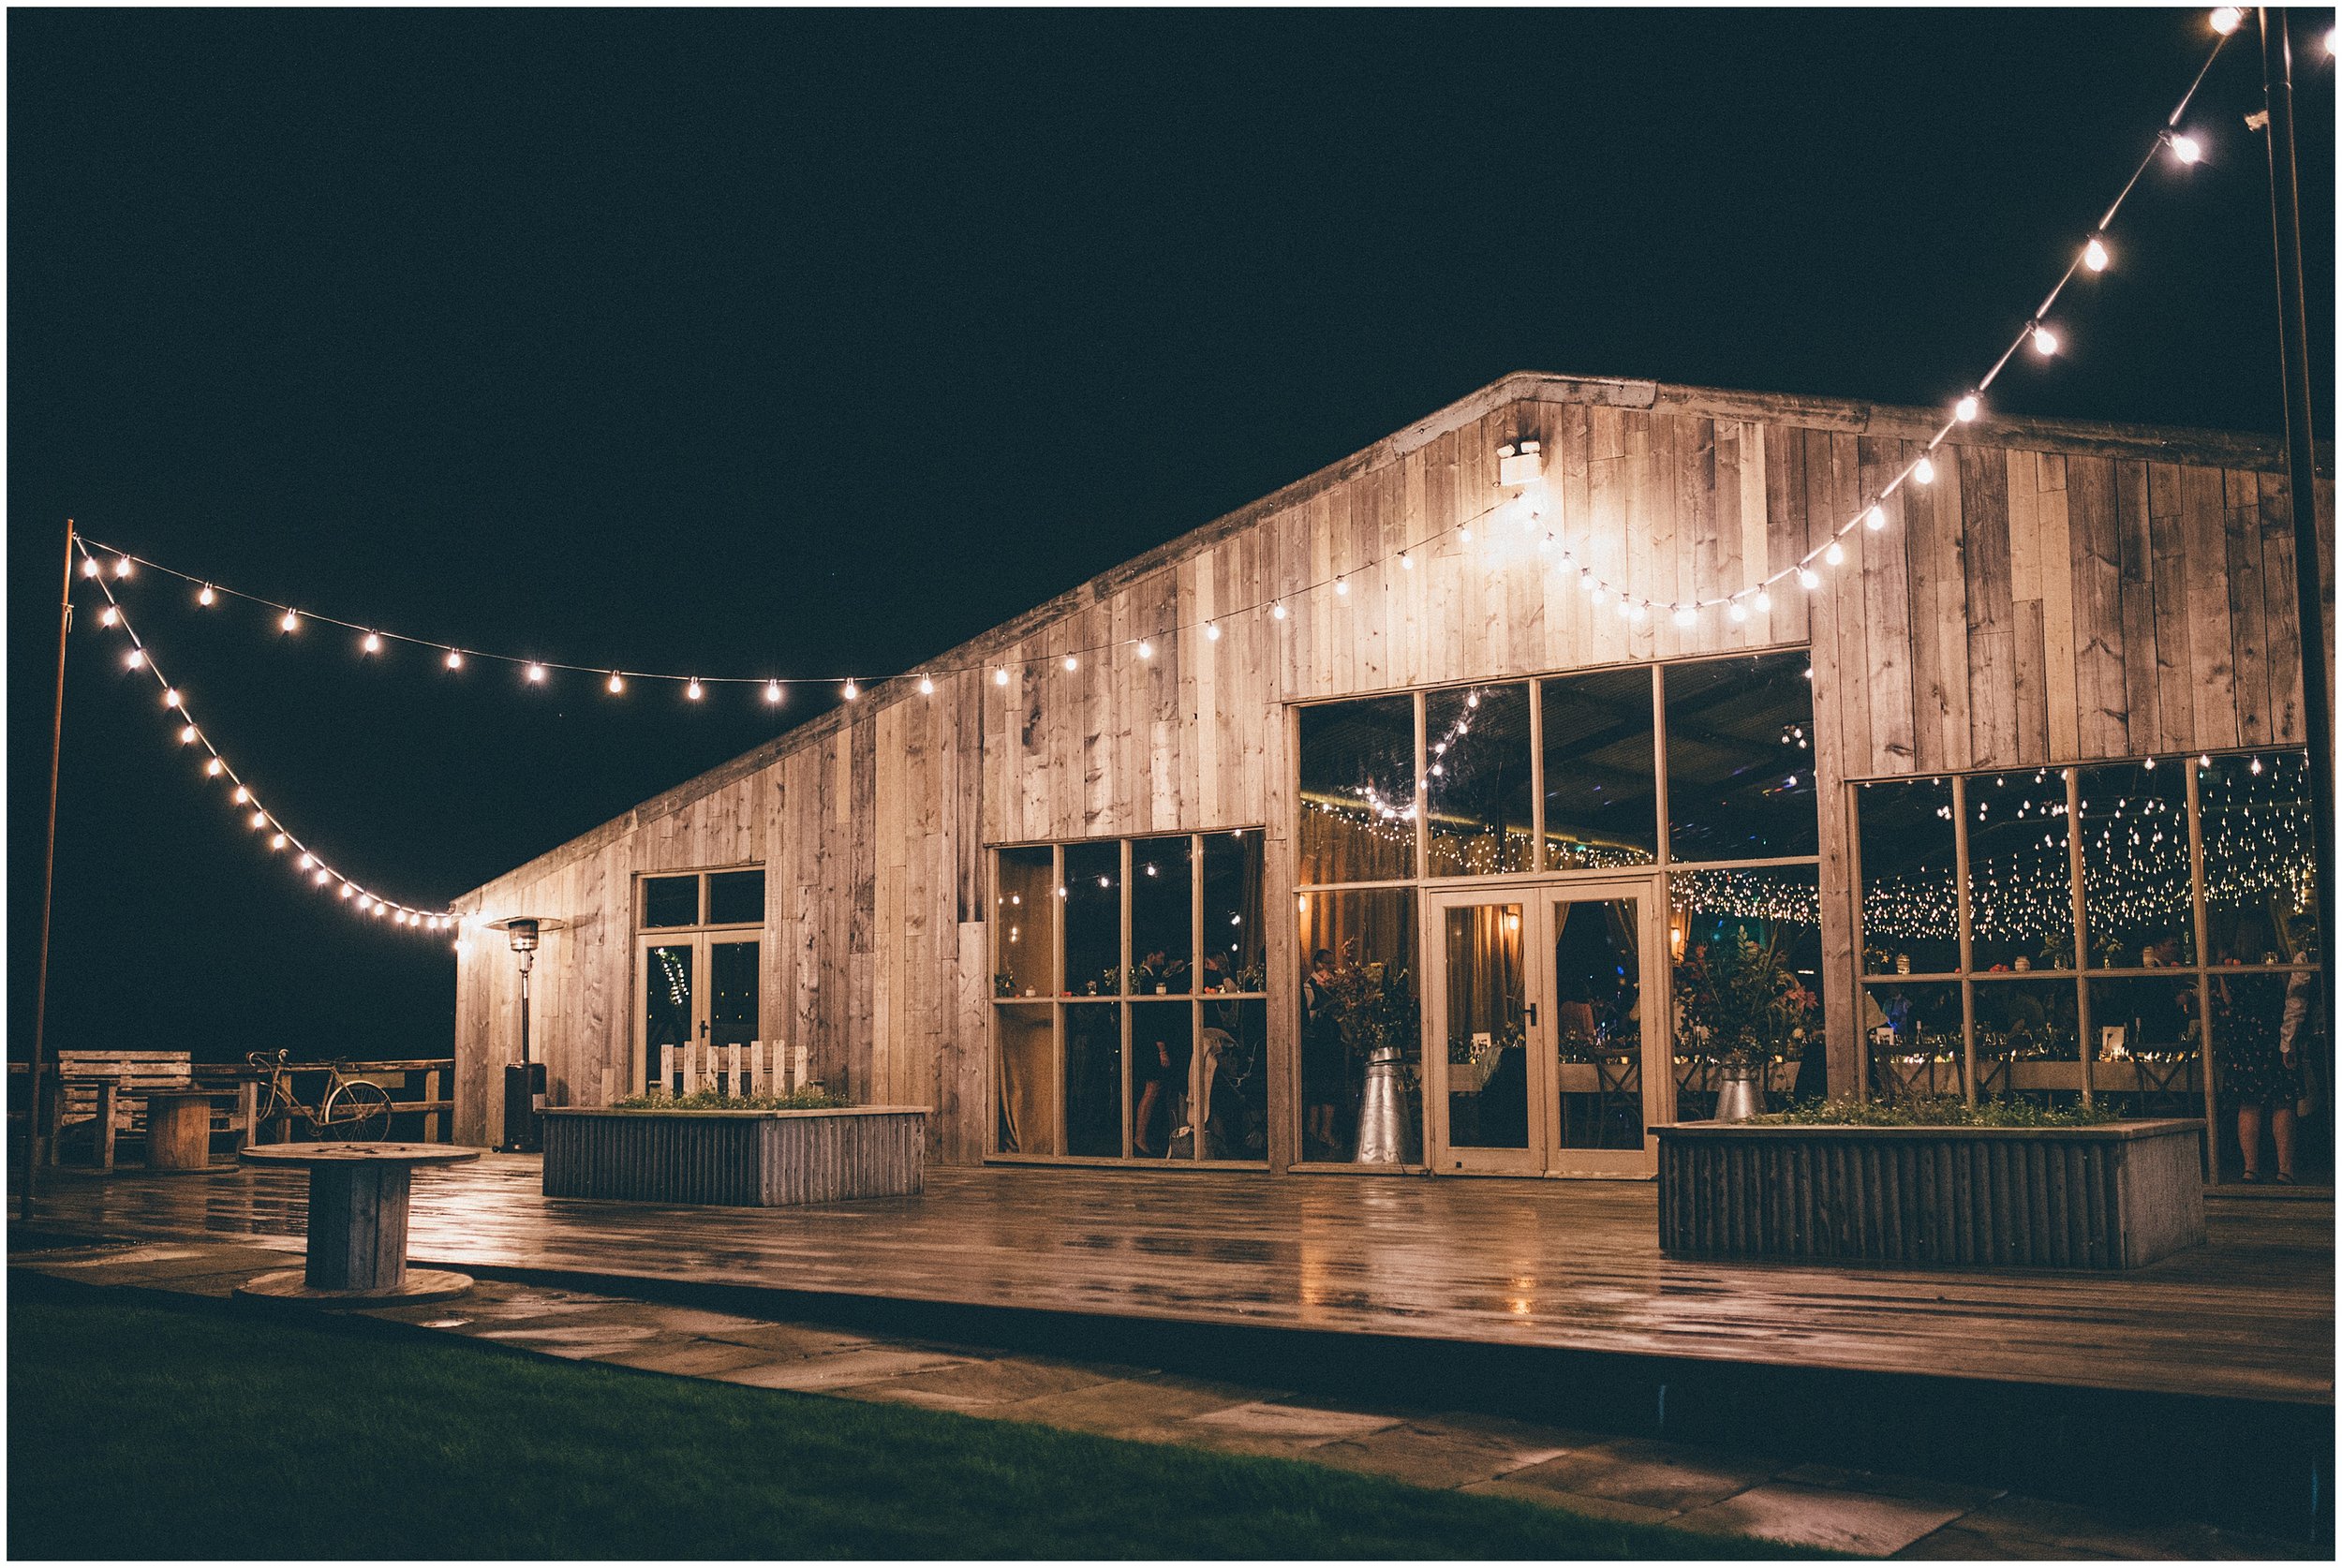 Grange Barn lit up with fairy lights in Autumn